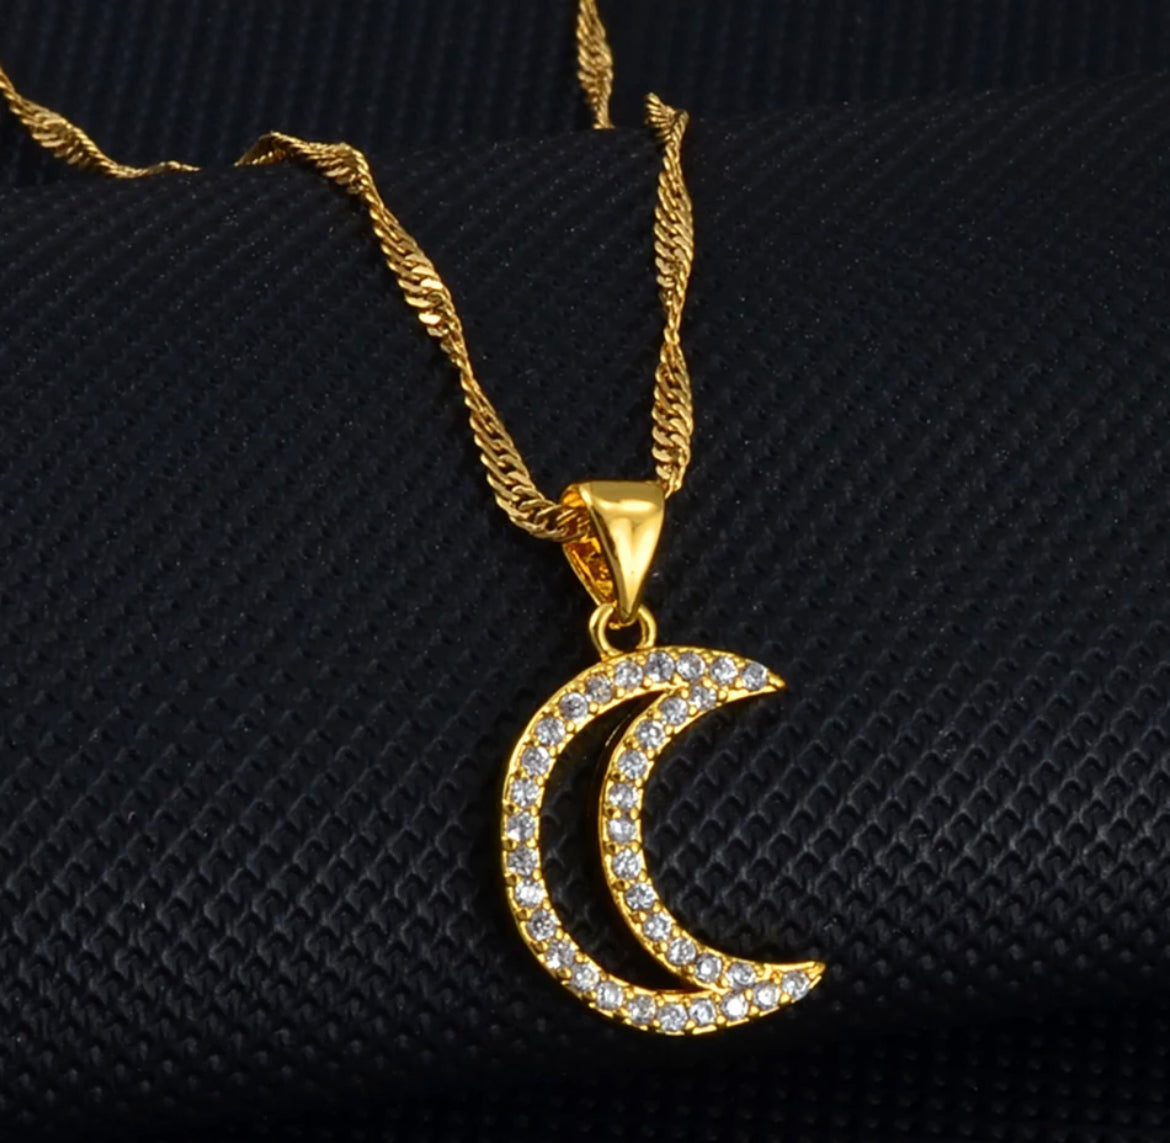 Moon/Star Charm necklace